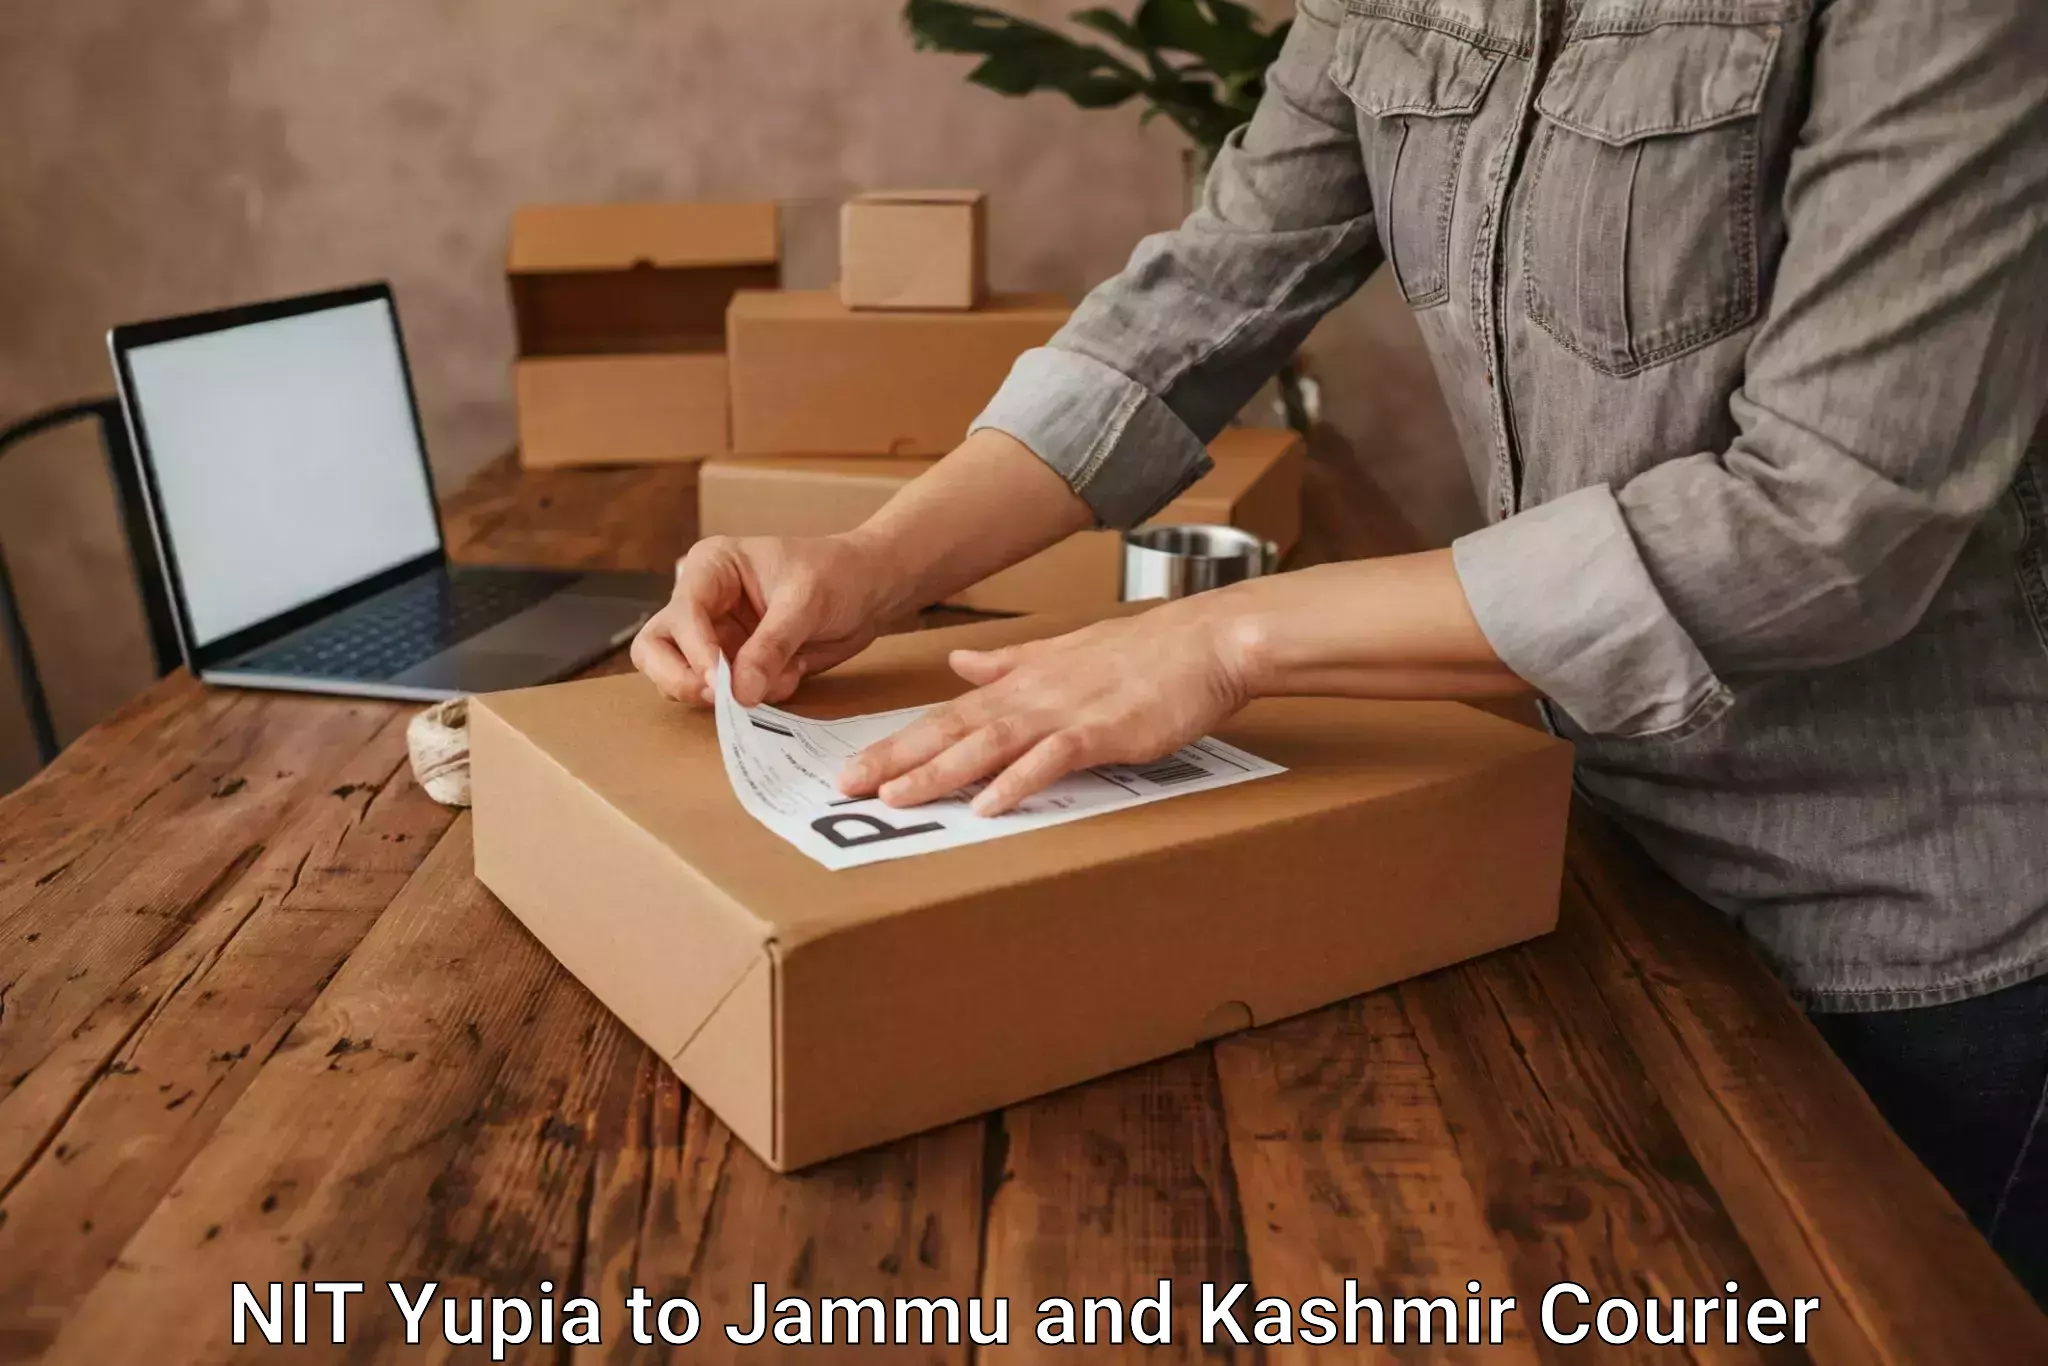 Reliable delivery network NIT Yupia to Kishtwar